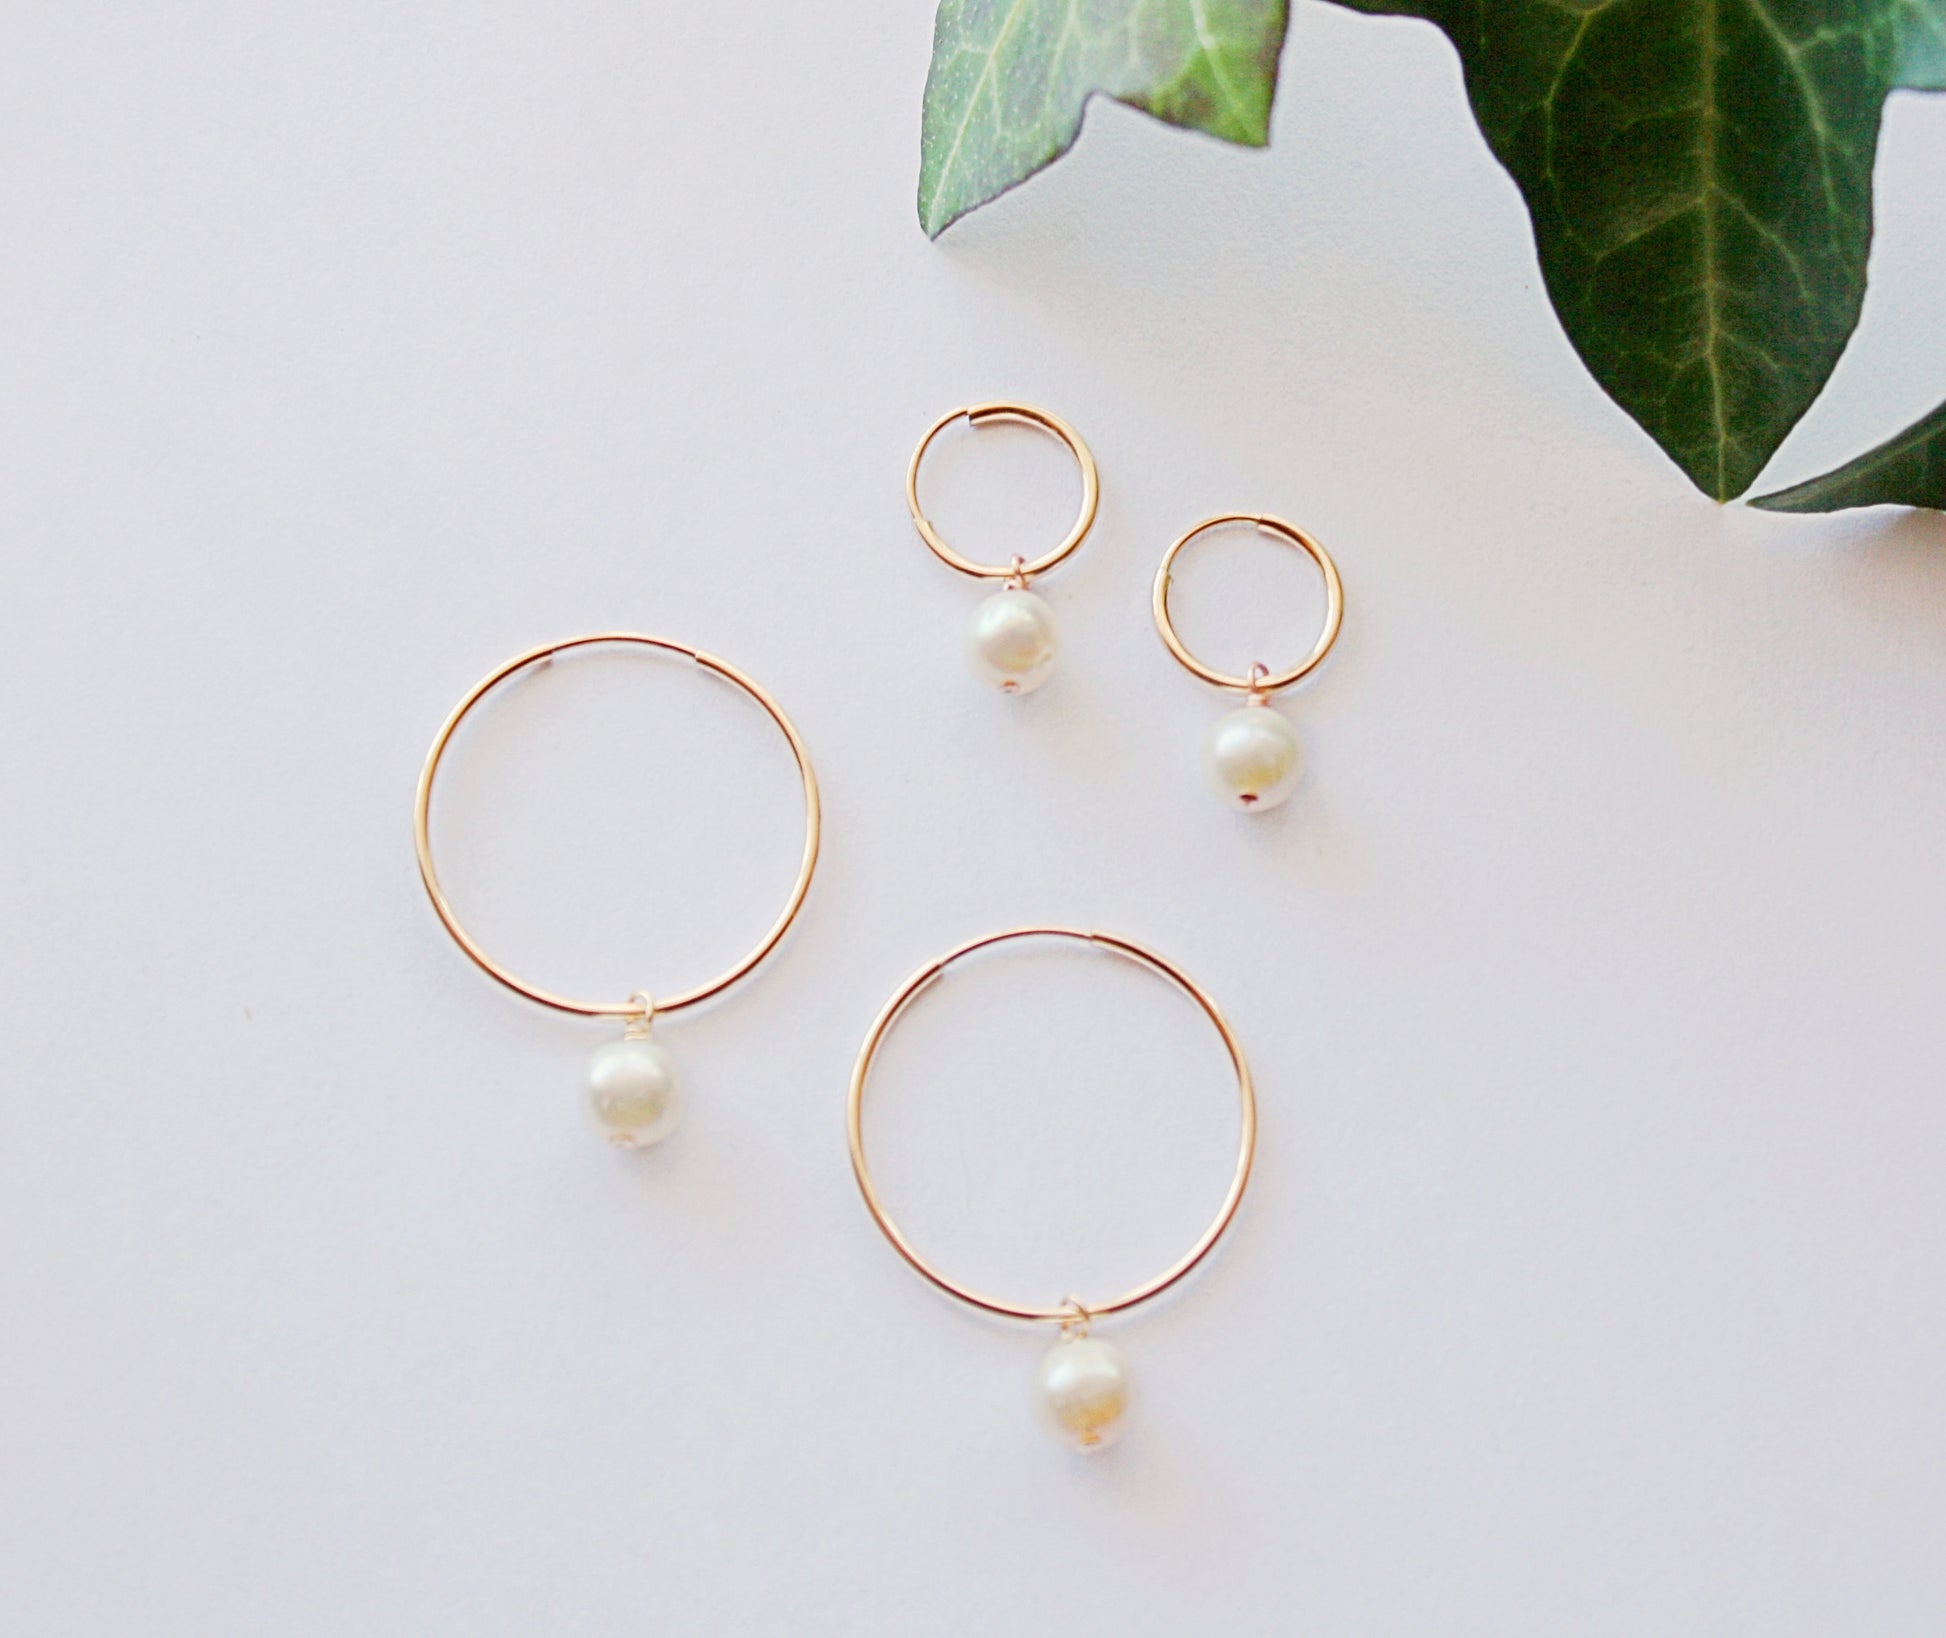 Single pearl hoops 1 inch and 1/2 inch